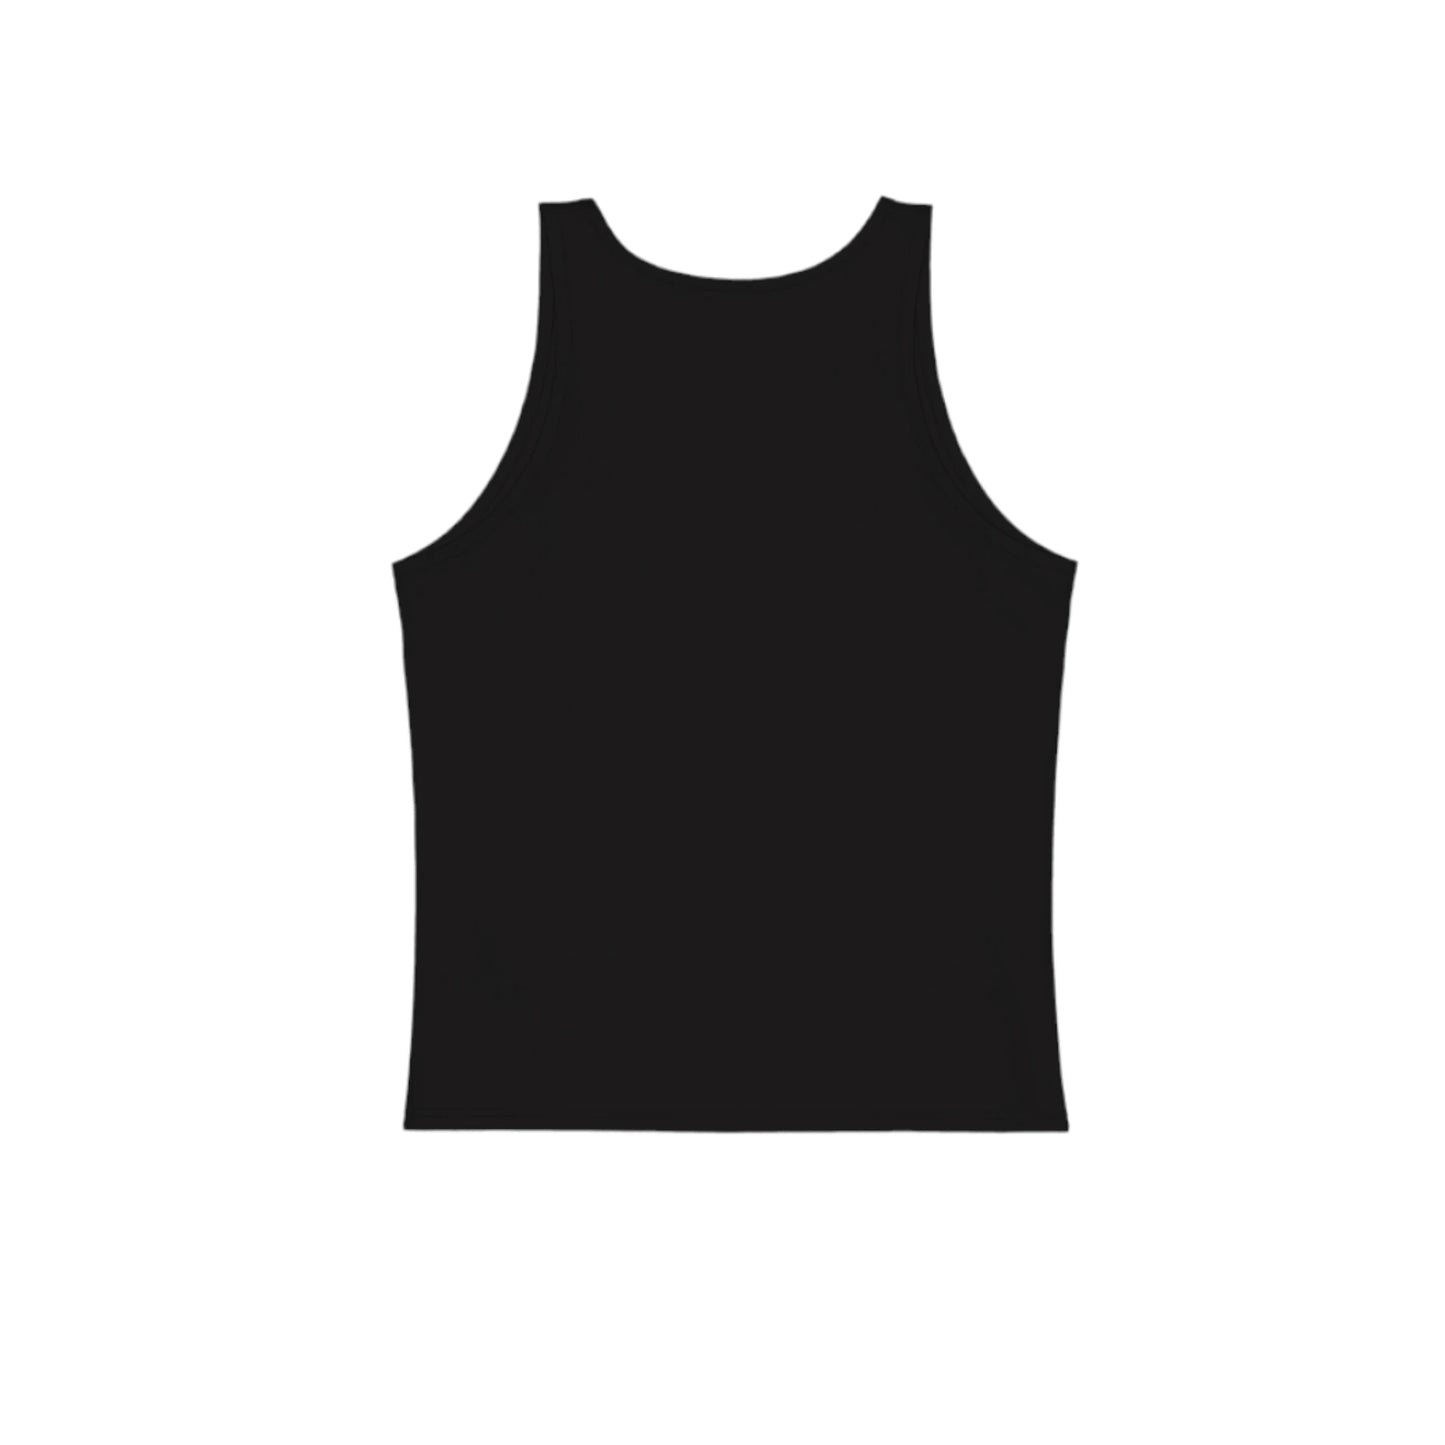 the back of the black tank top